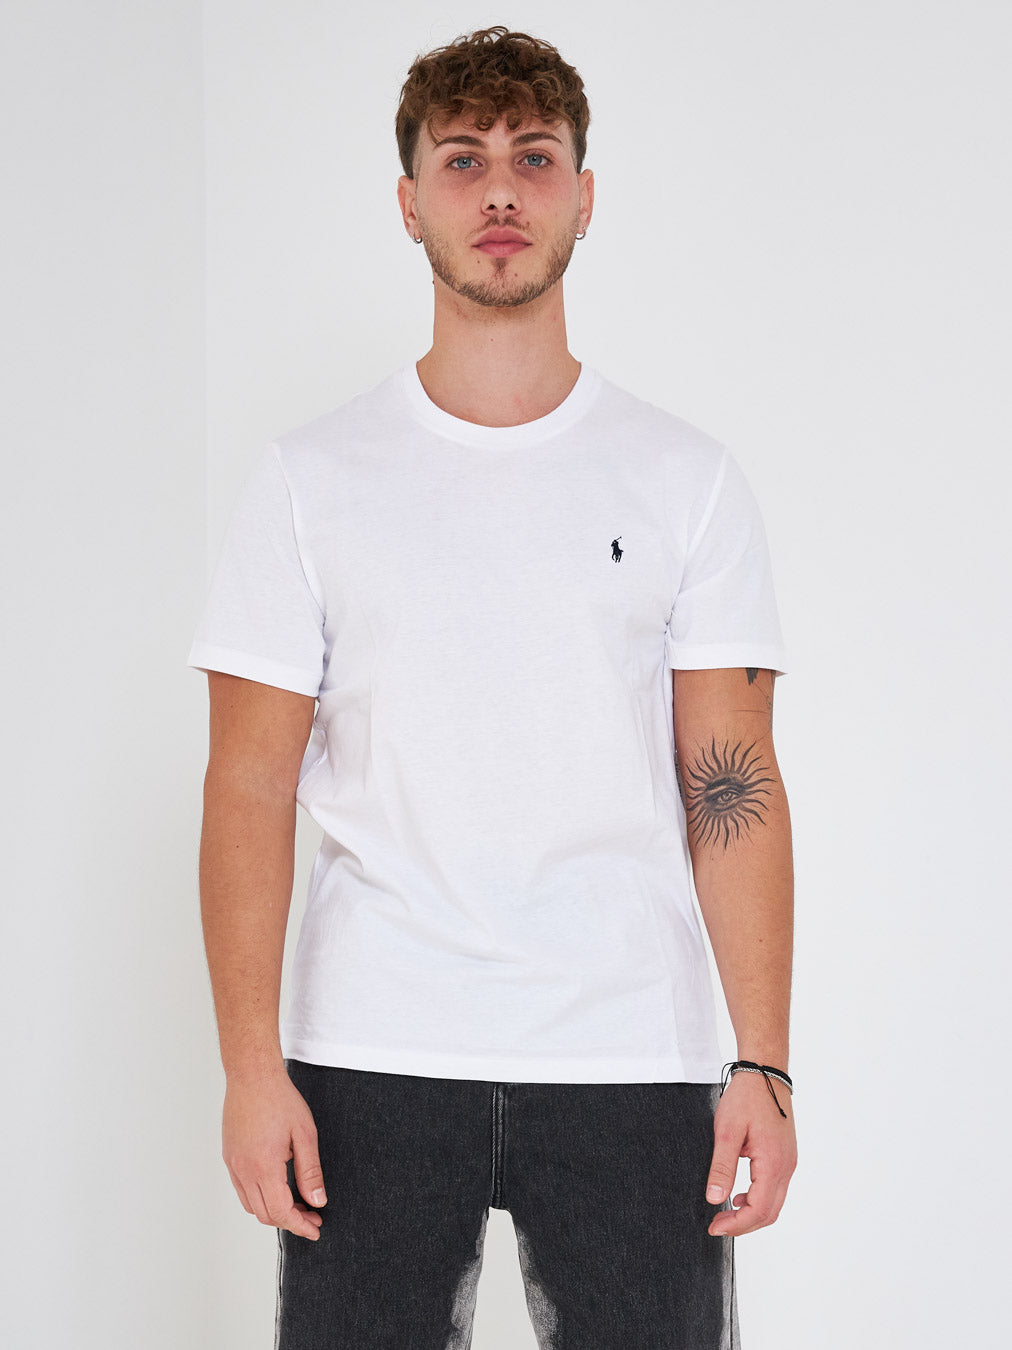 Ralph Lauren white t-shirt with embroidered logo